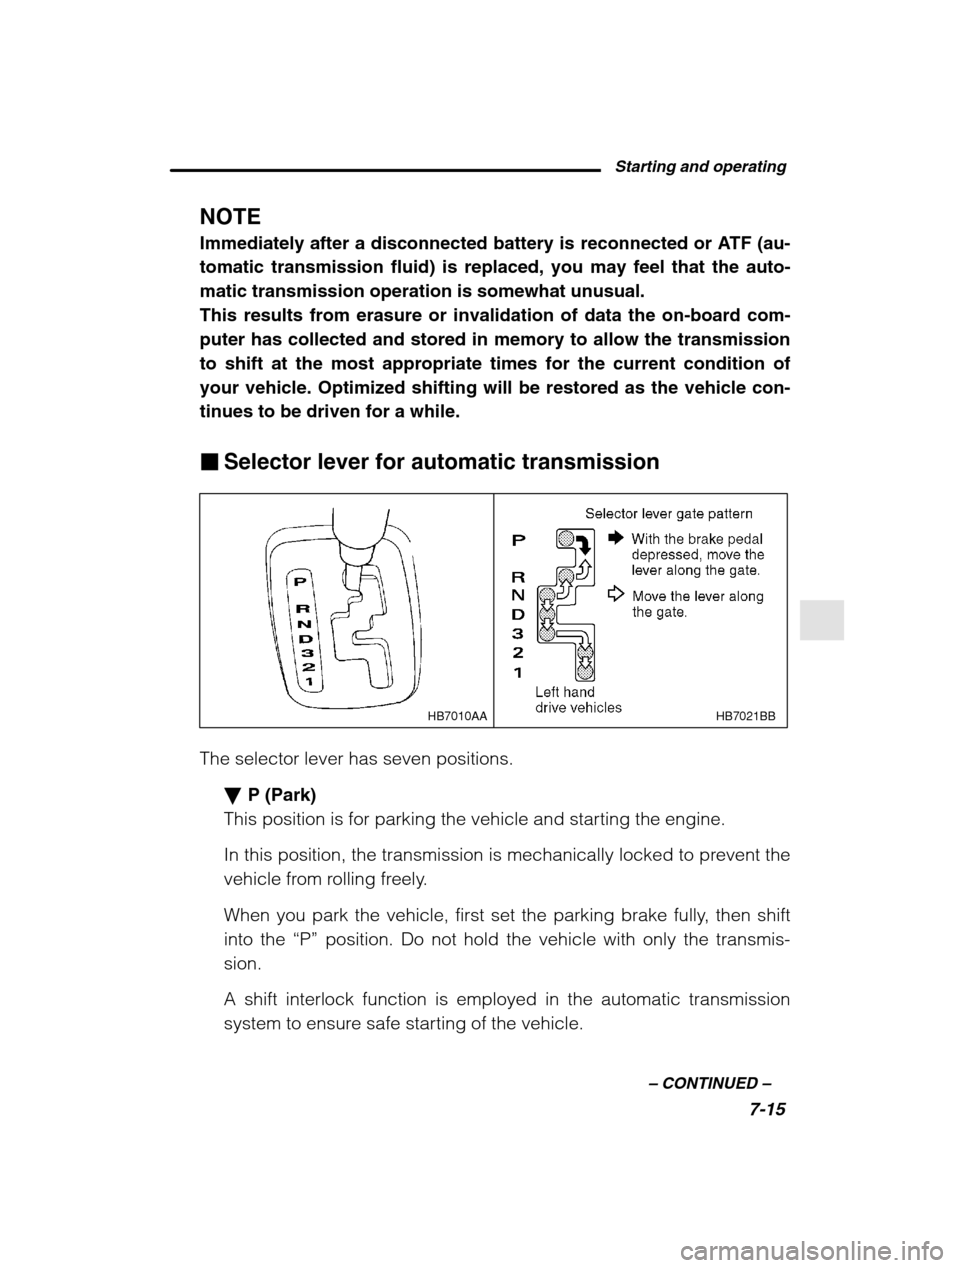 SUBARU OUTBACK 2002 3.G Owners Manual Starting and operating7-15
–
 CONTINUED  –
NOTE 
Immediately after a disconnected battery is reconnected or ATF (au- tomatic transmission fluid) is replaced, you may feel that the auto-matic trans